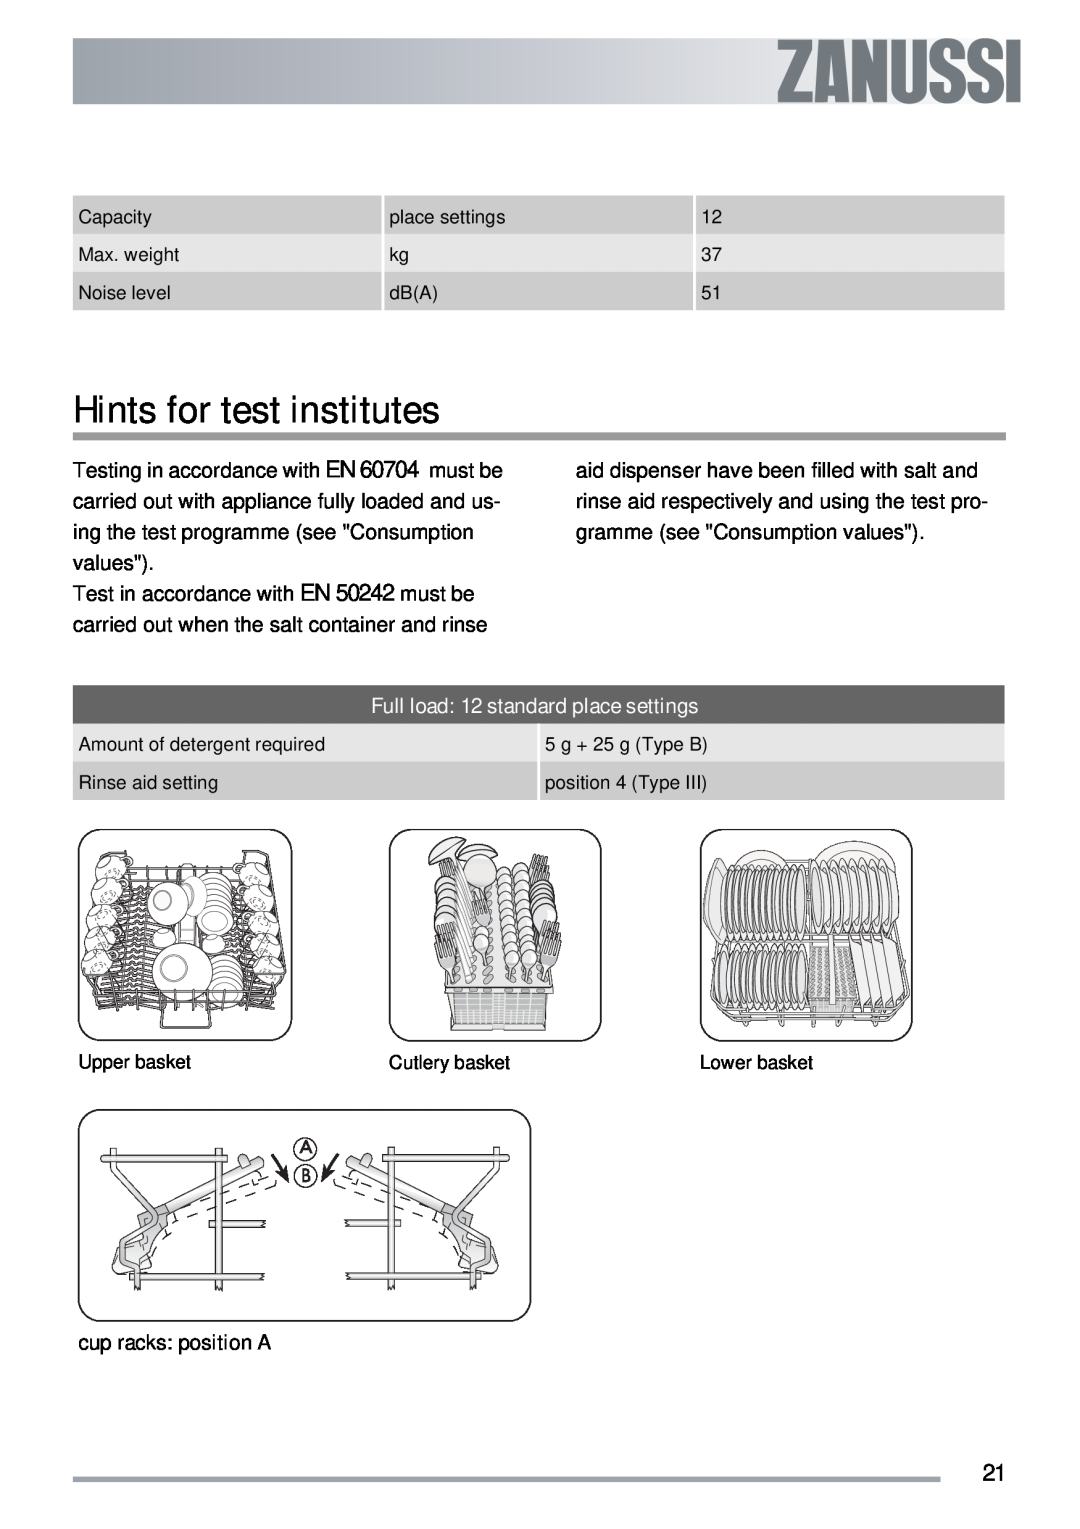 Zanussi ZDT40 user manual Hints for test institutes, Full load 12 standard place settings, cup racks position A 